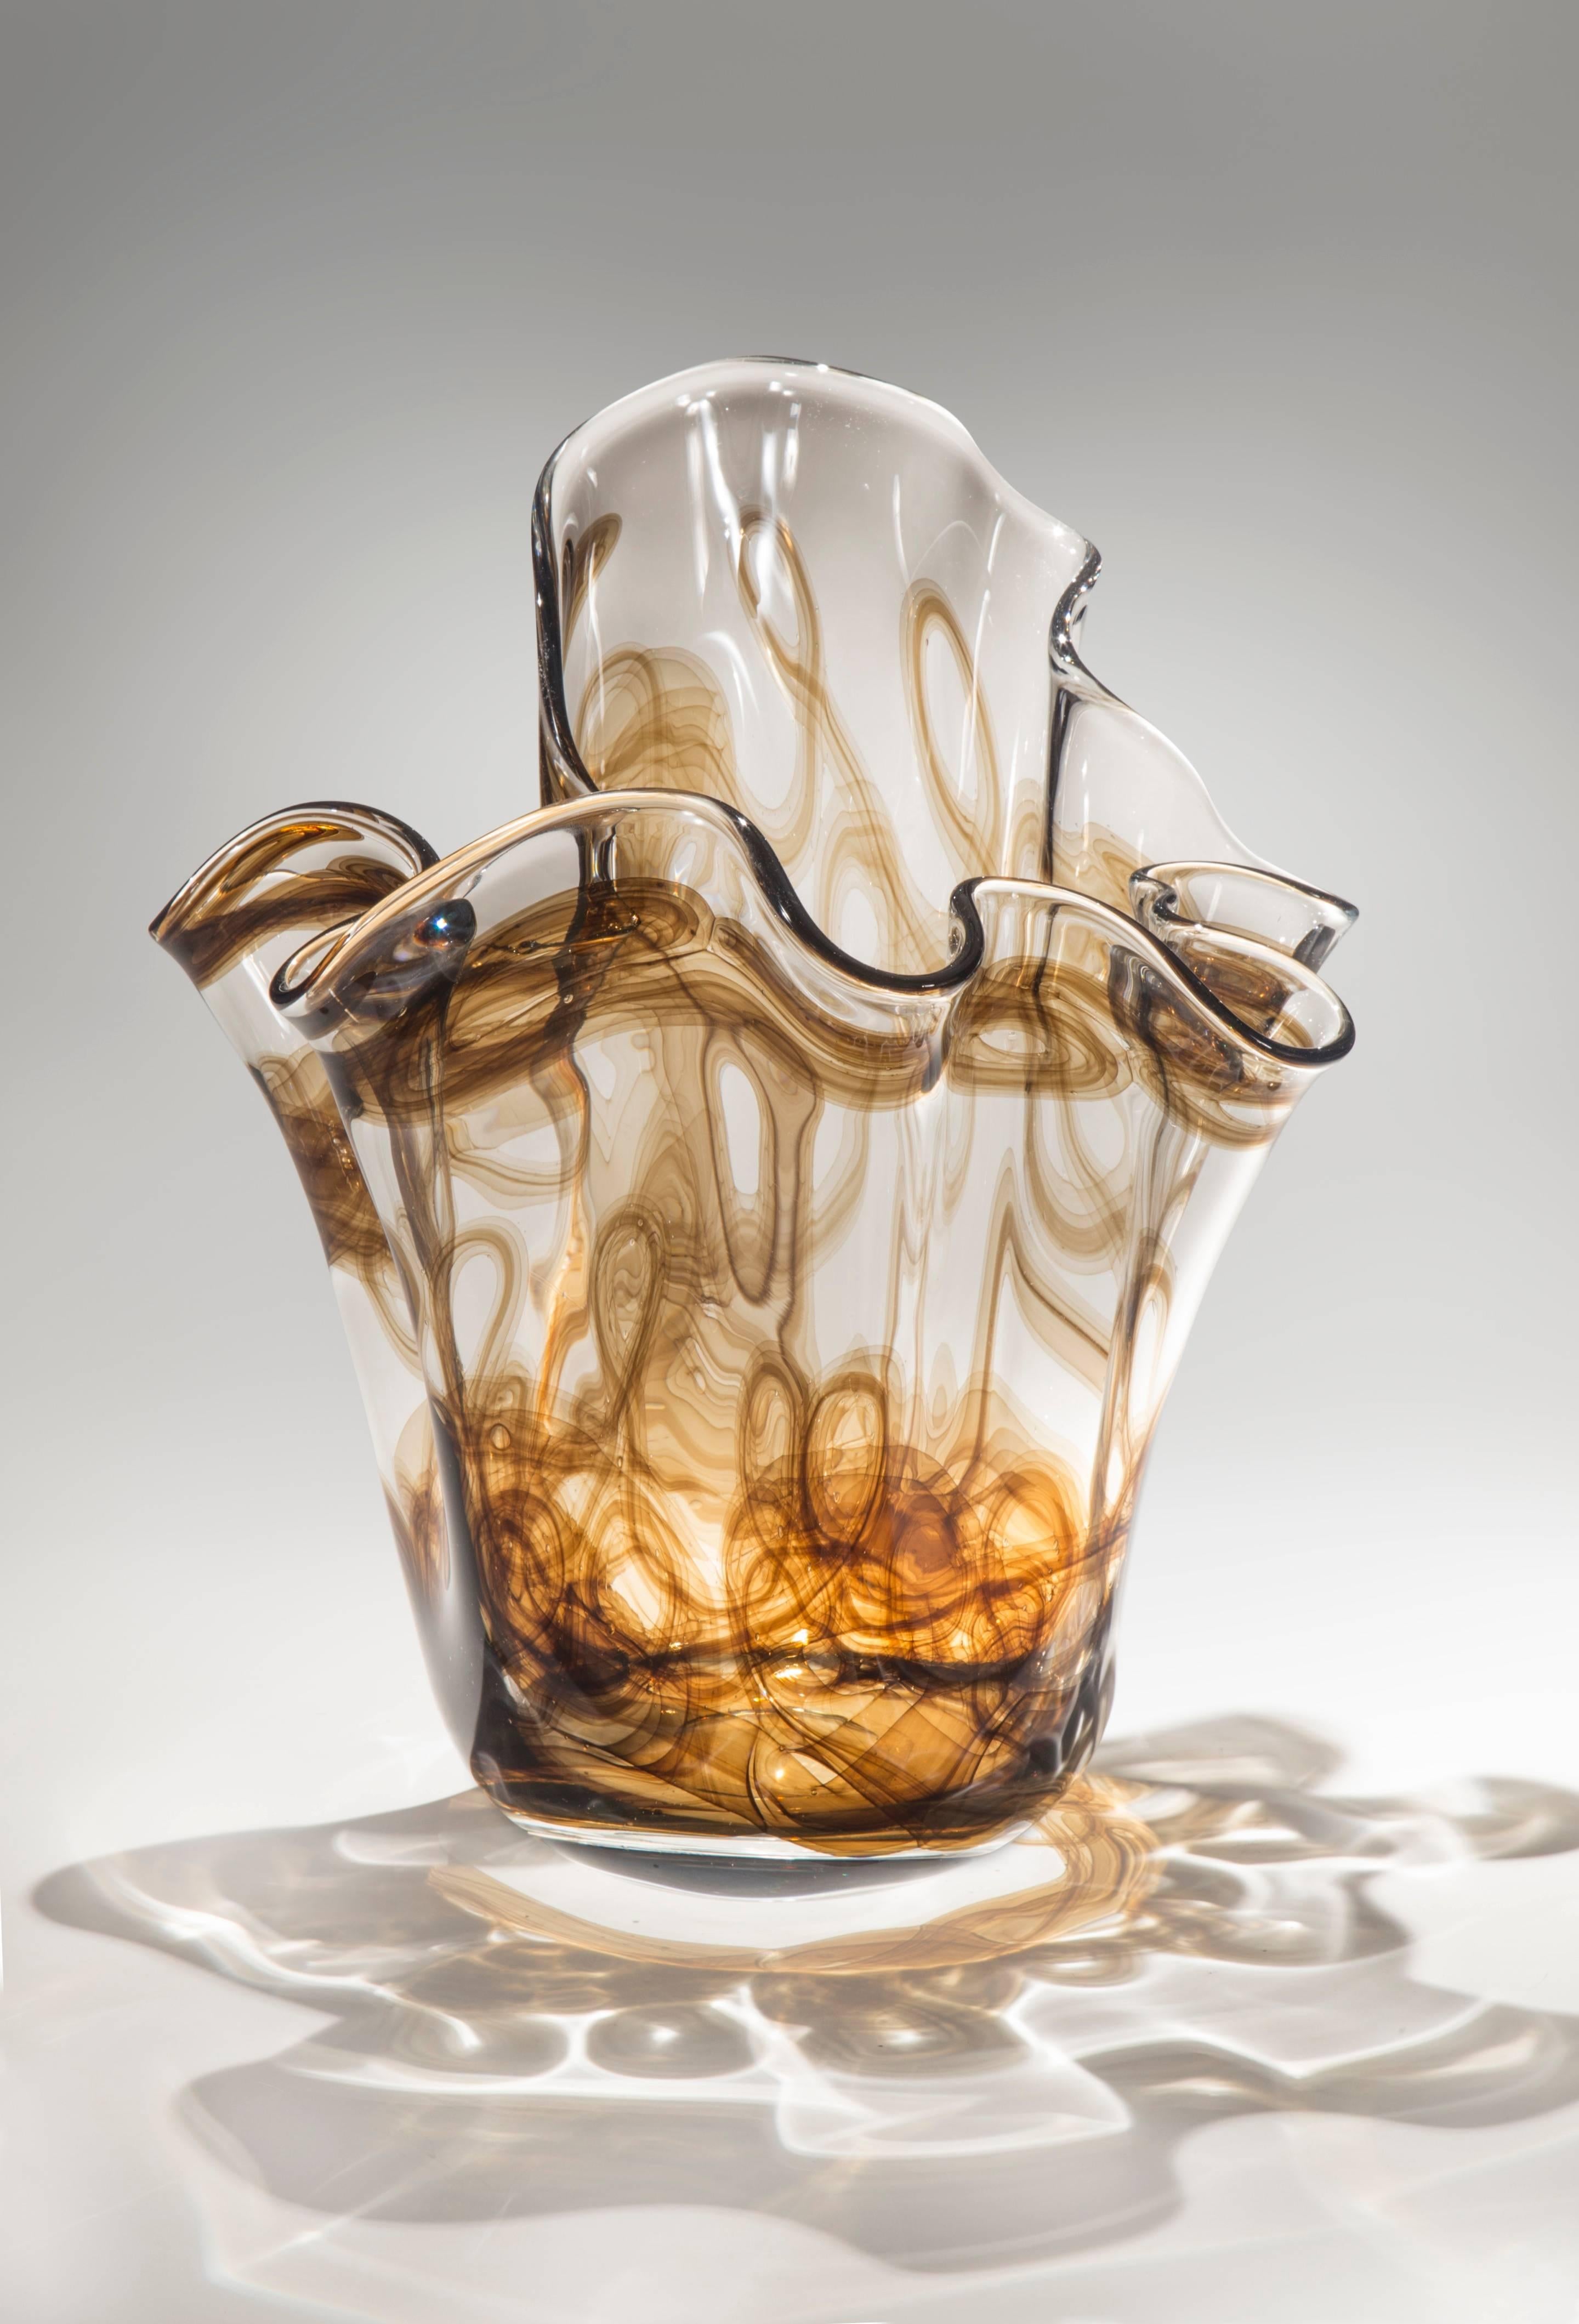 Danish Michael Bang for Holmegaard, Unique and Monumental Glass Handkerchief Vase